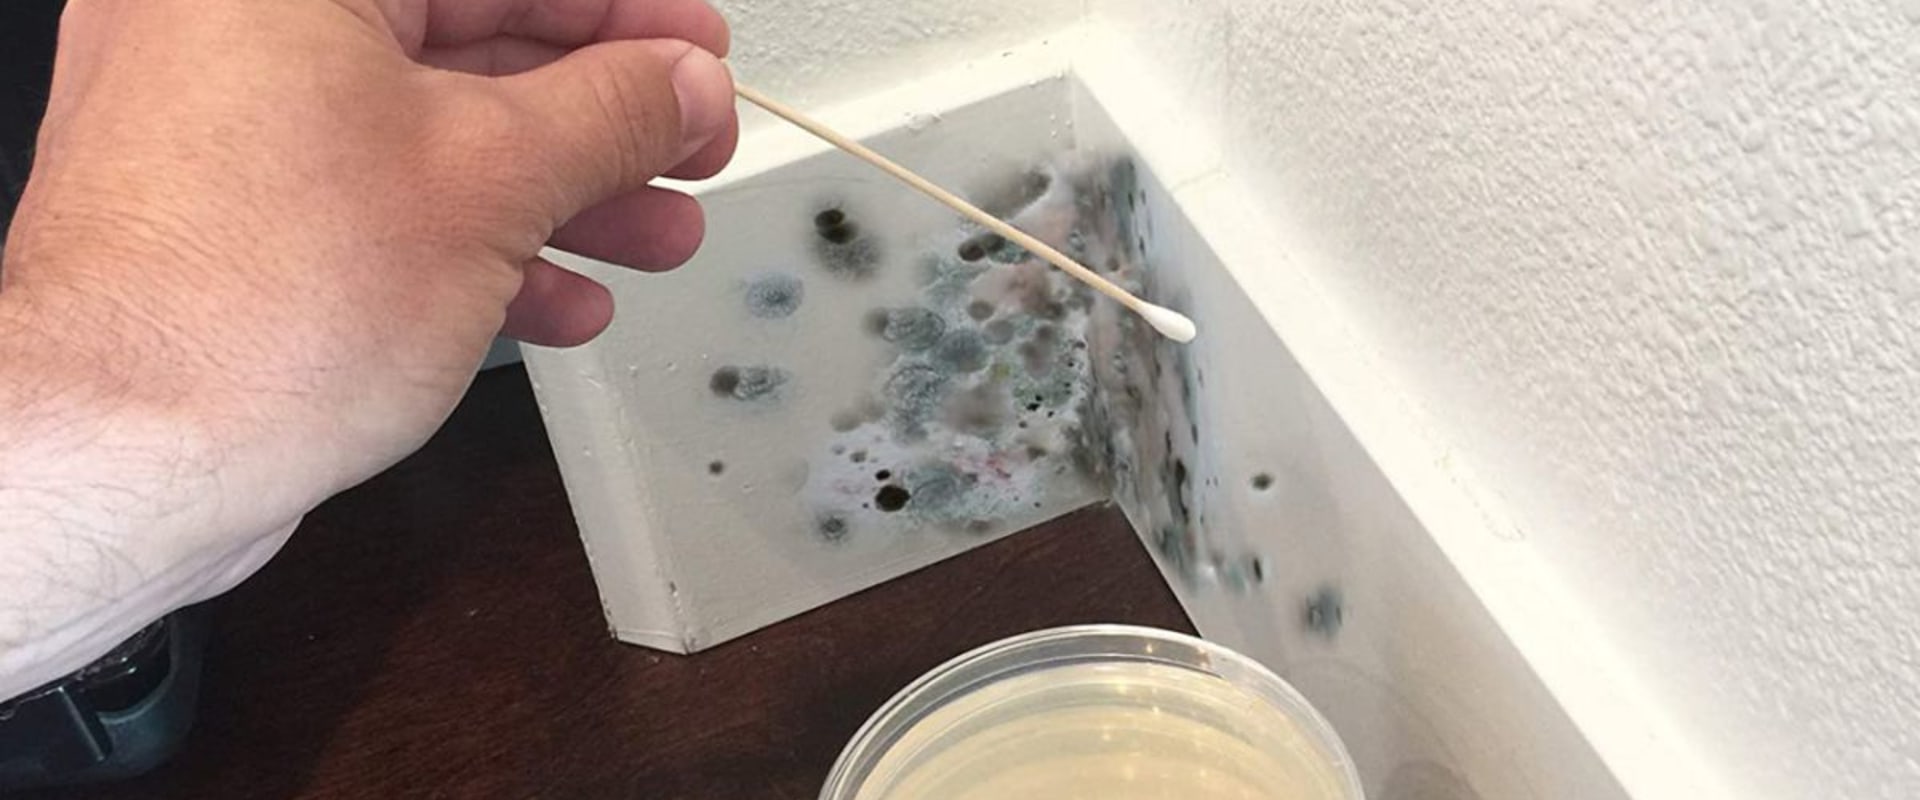 Should You Do a Mold Test on Your House?